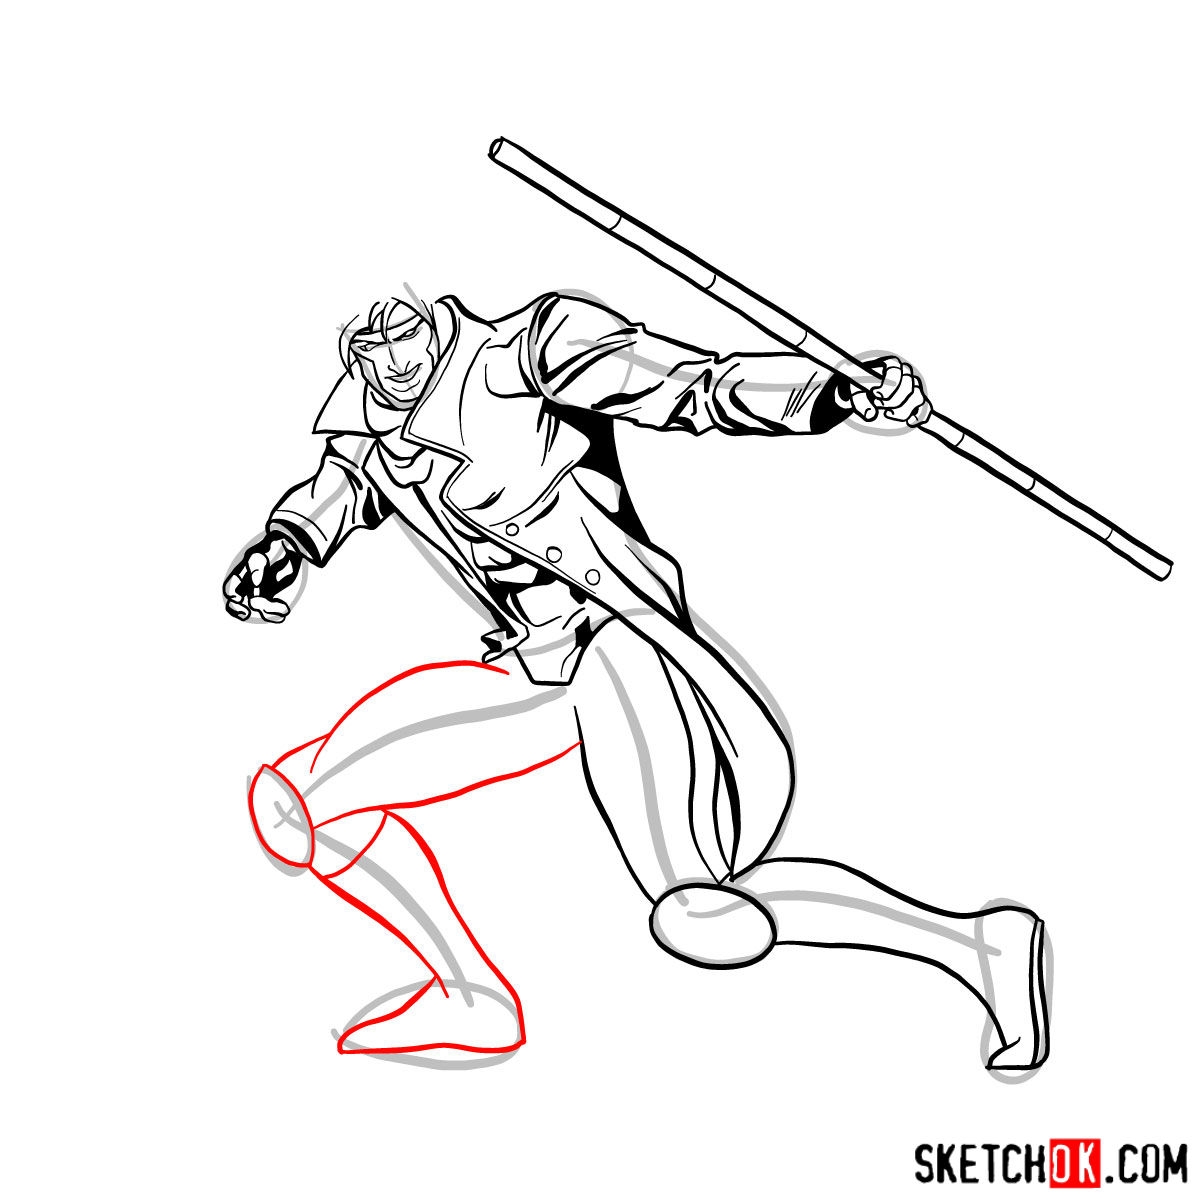 How to draw Gambit from X-Men comics - step 11